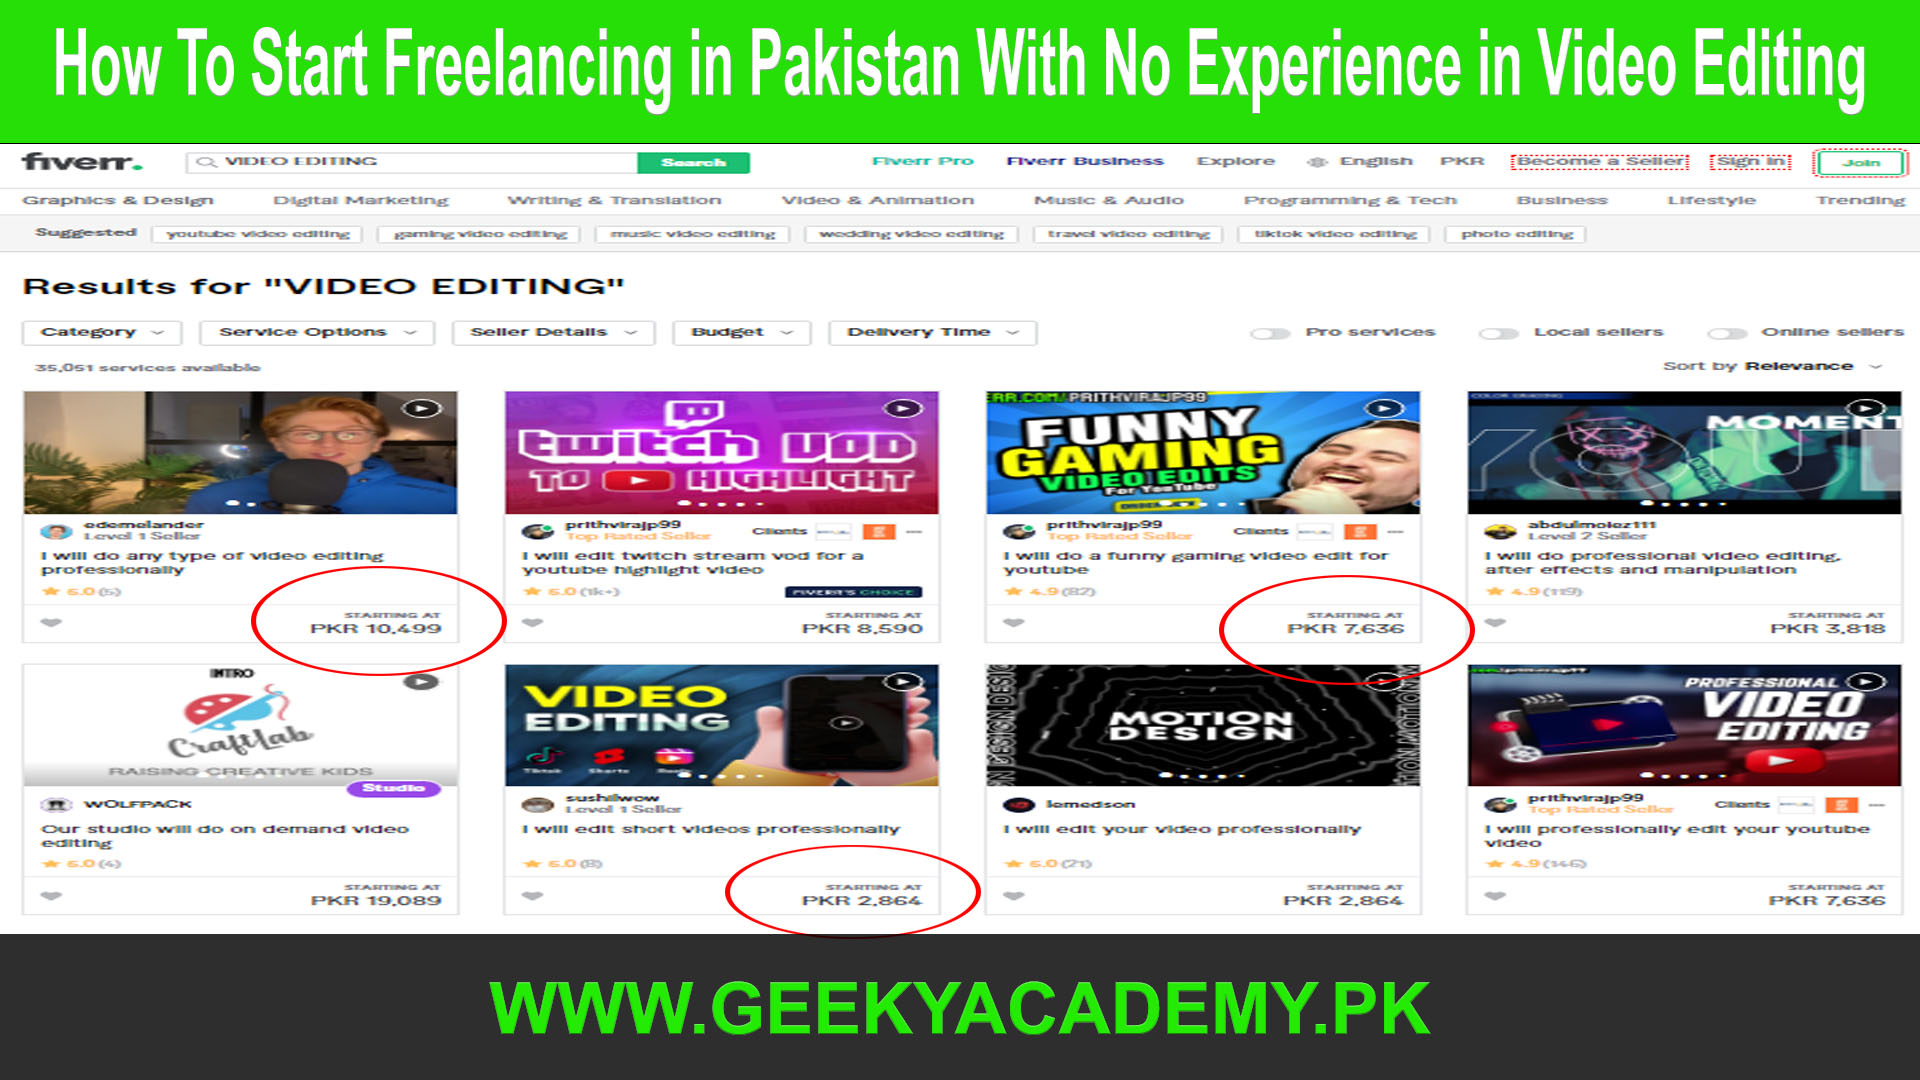 How To Start Freelancing in Pakistan With No Experience in Video Editing, Fiverr, Video Editing